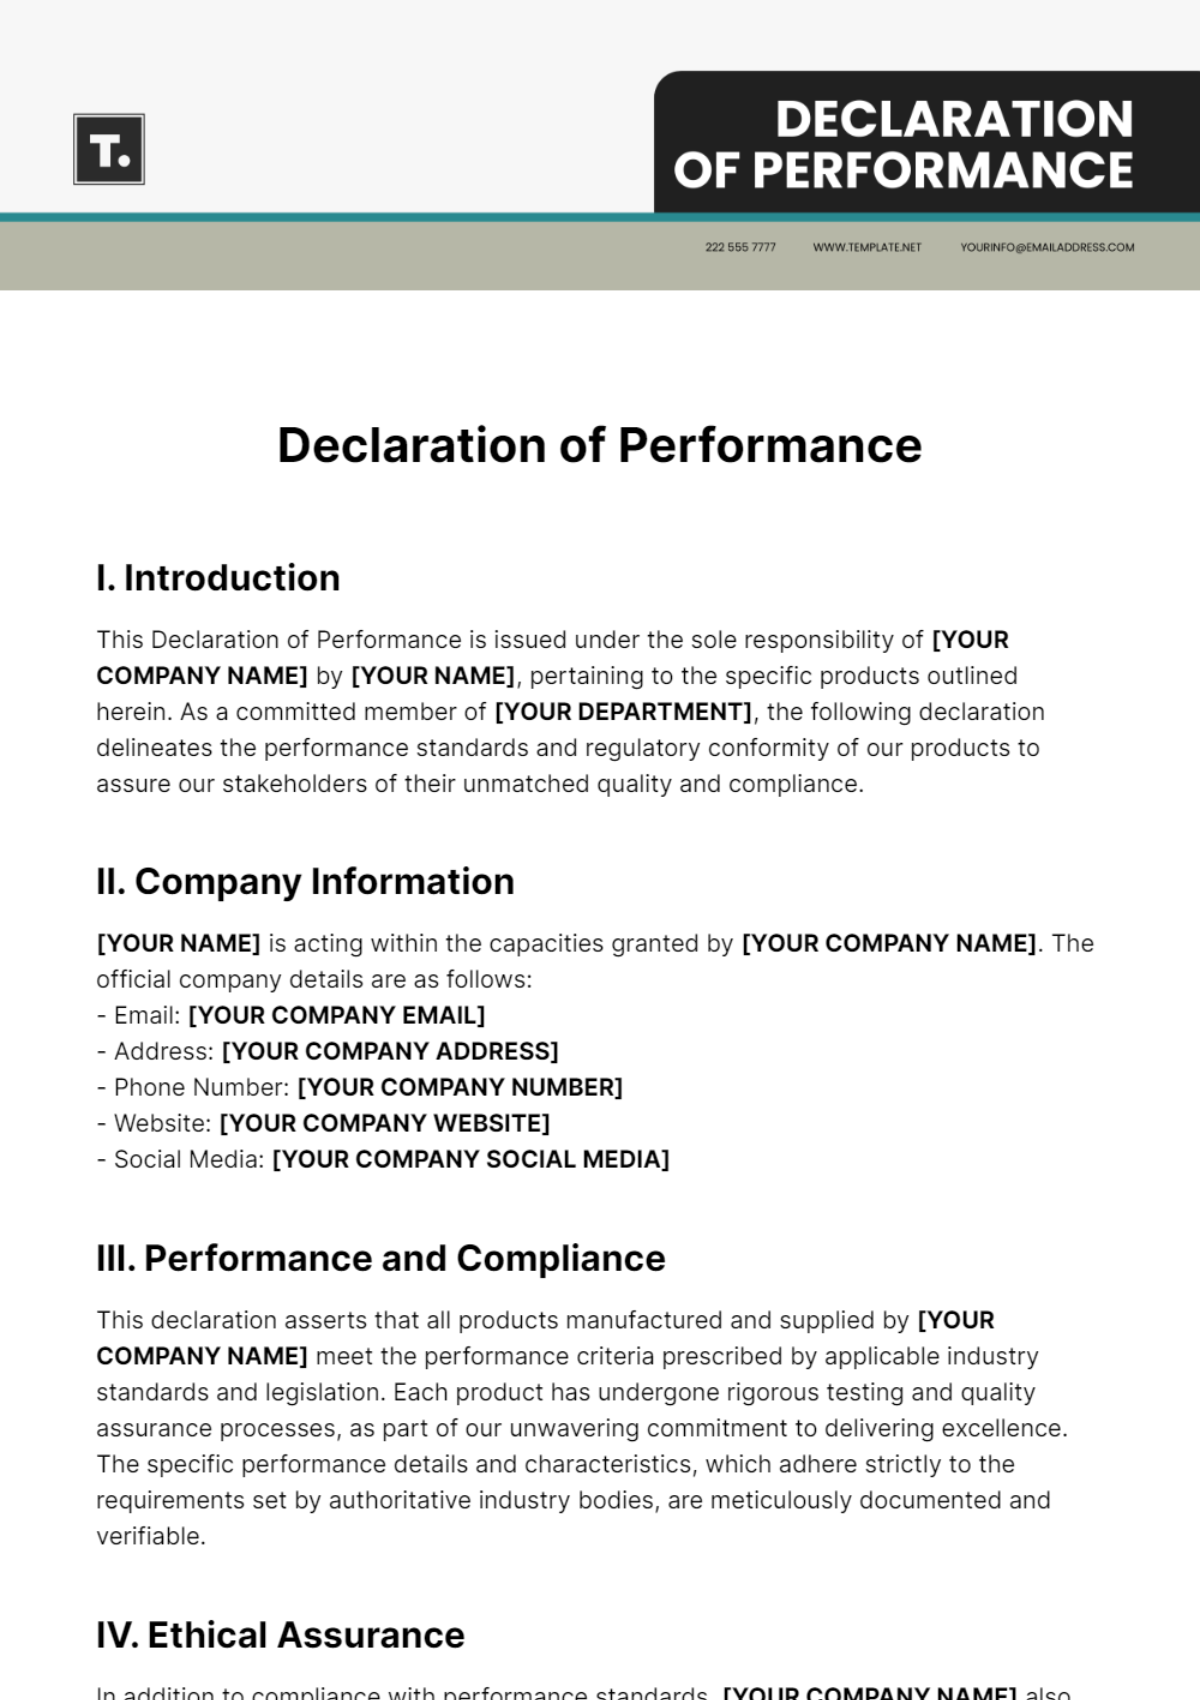 Free Declaration of Performance Template